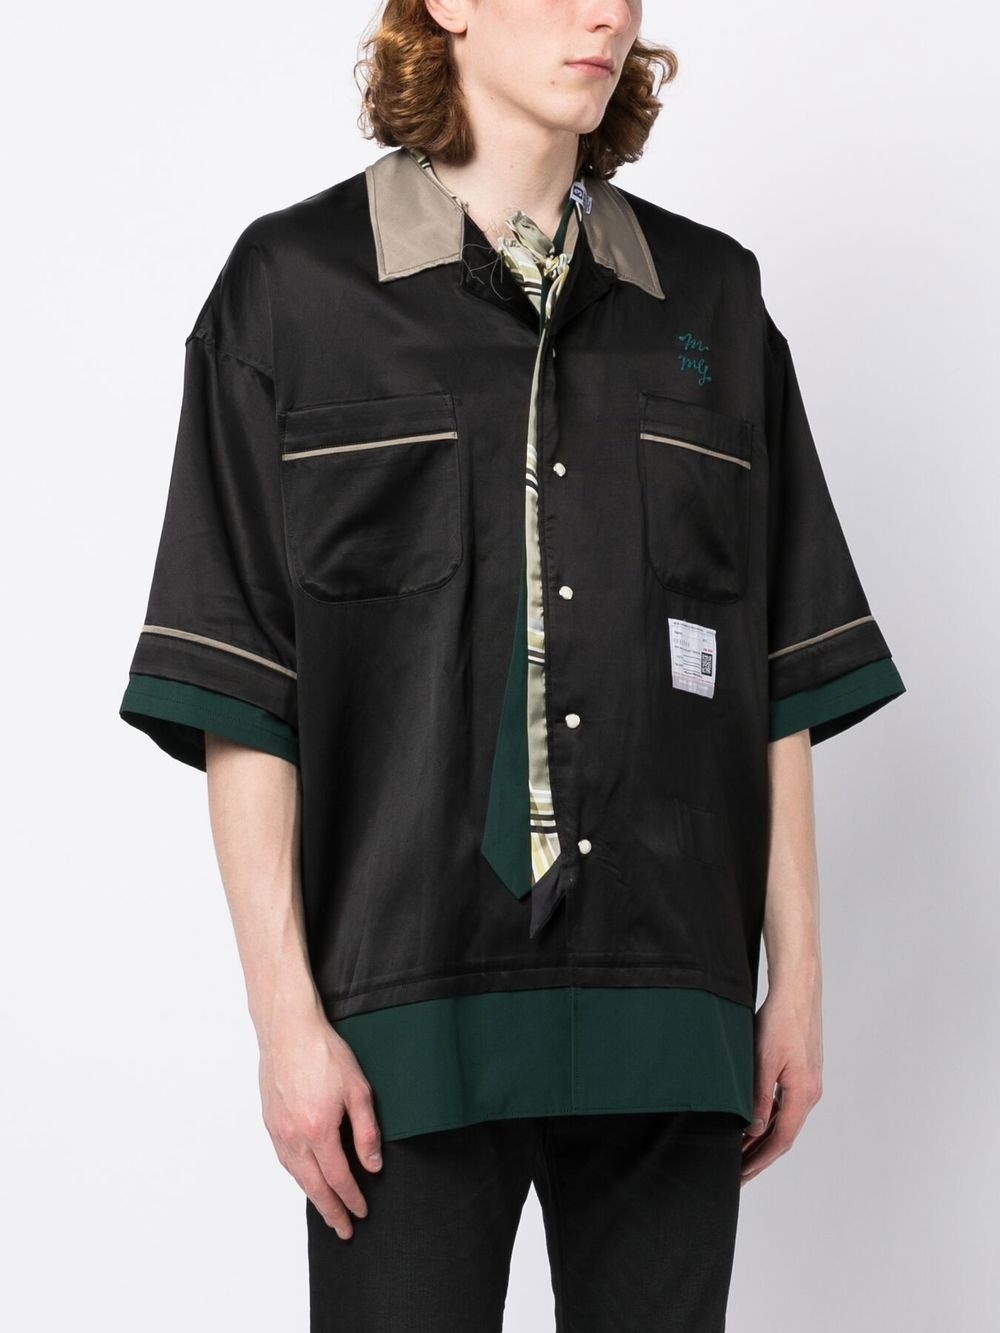 embroidered bowling shirt - 3